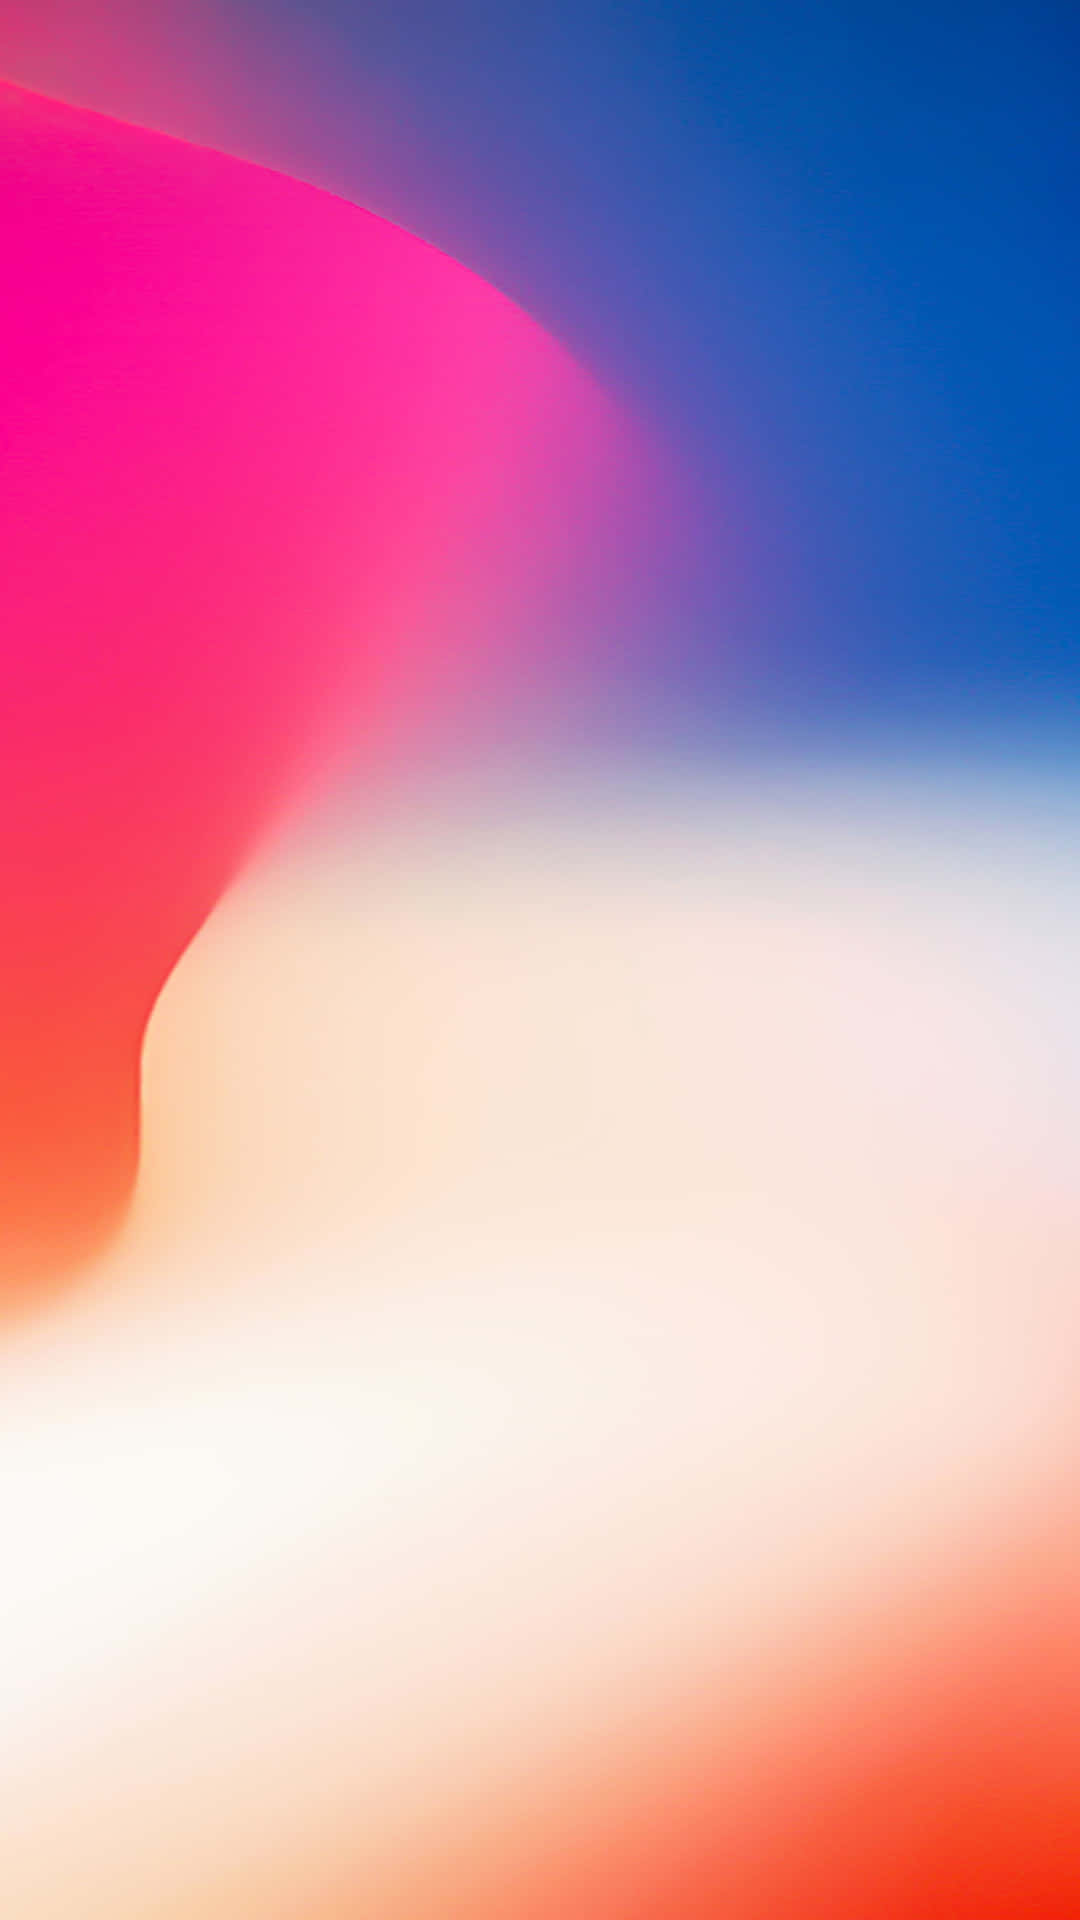 An Iphone X With A Pink And Blue Background Wallpaper